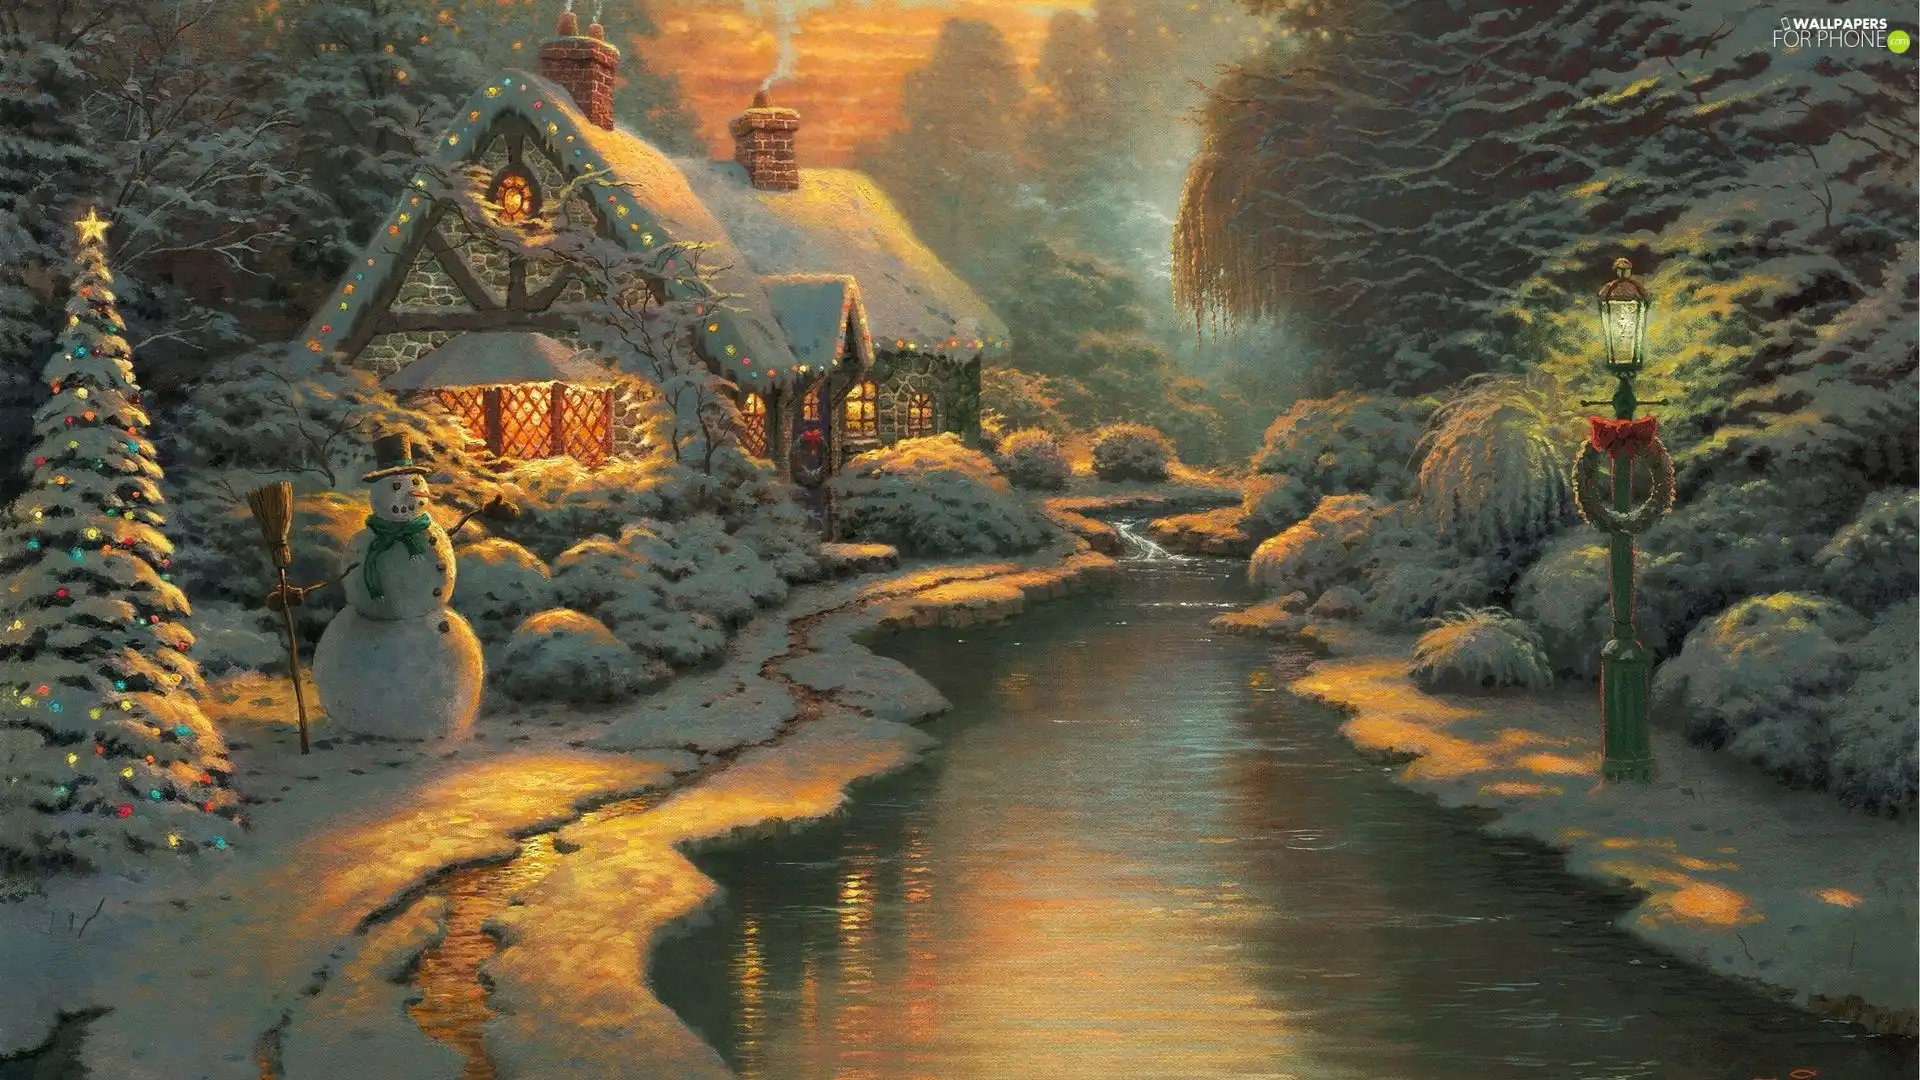 house, Lamps, River, forest, winter